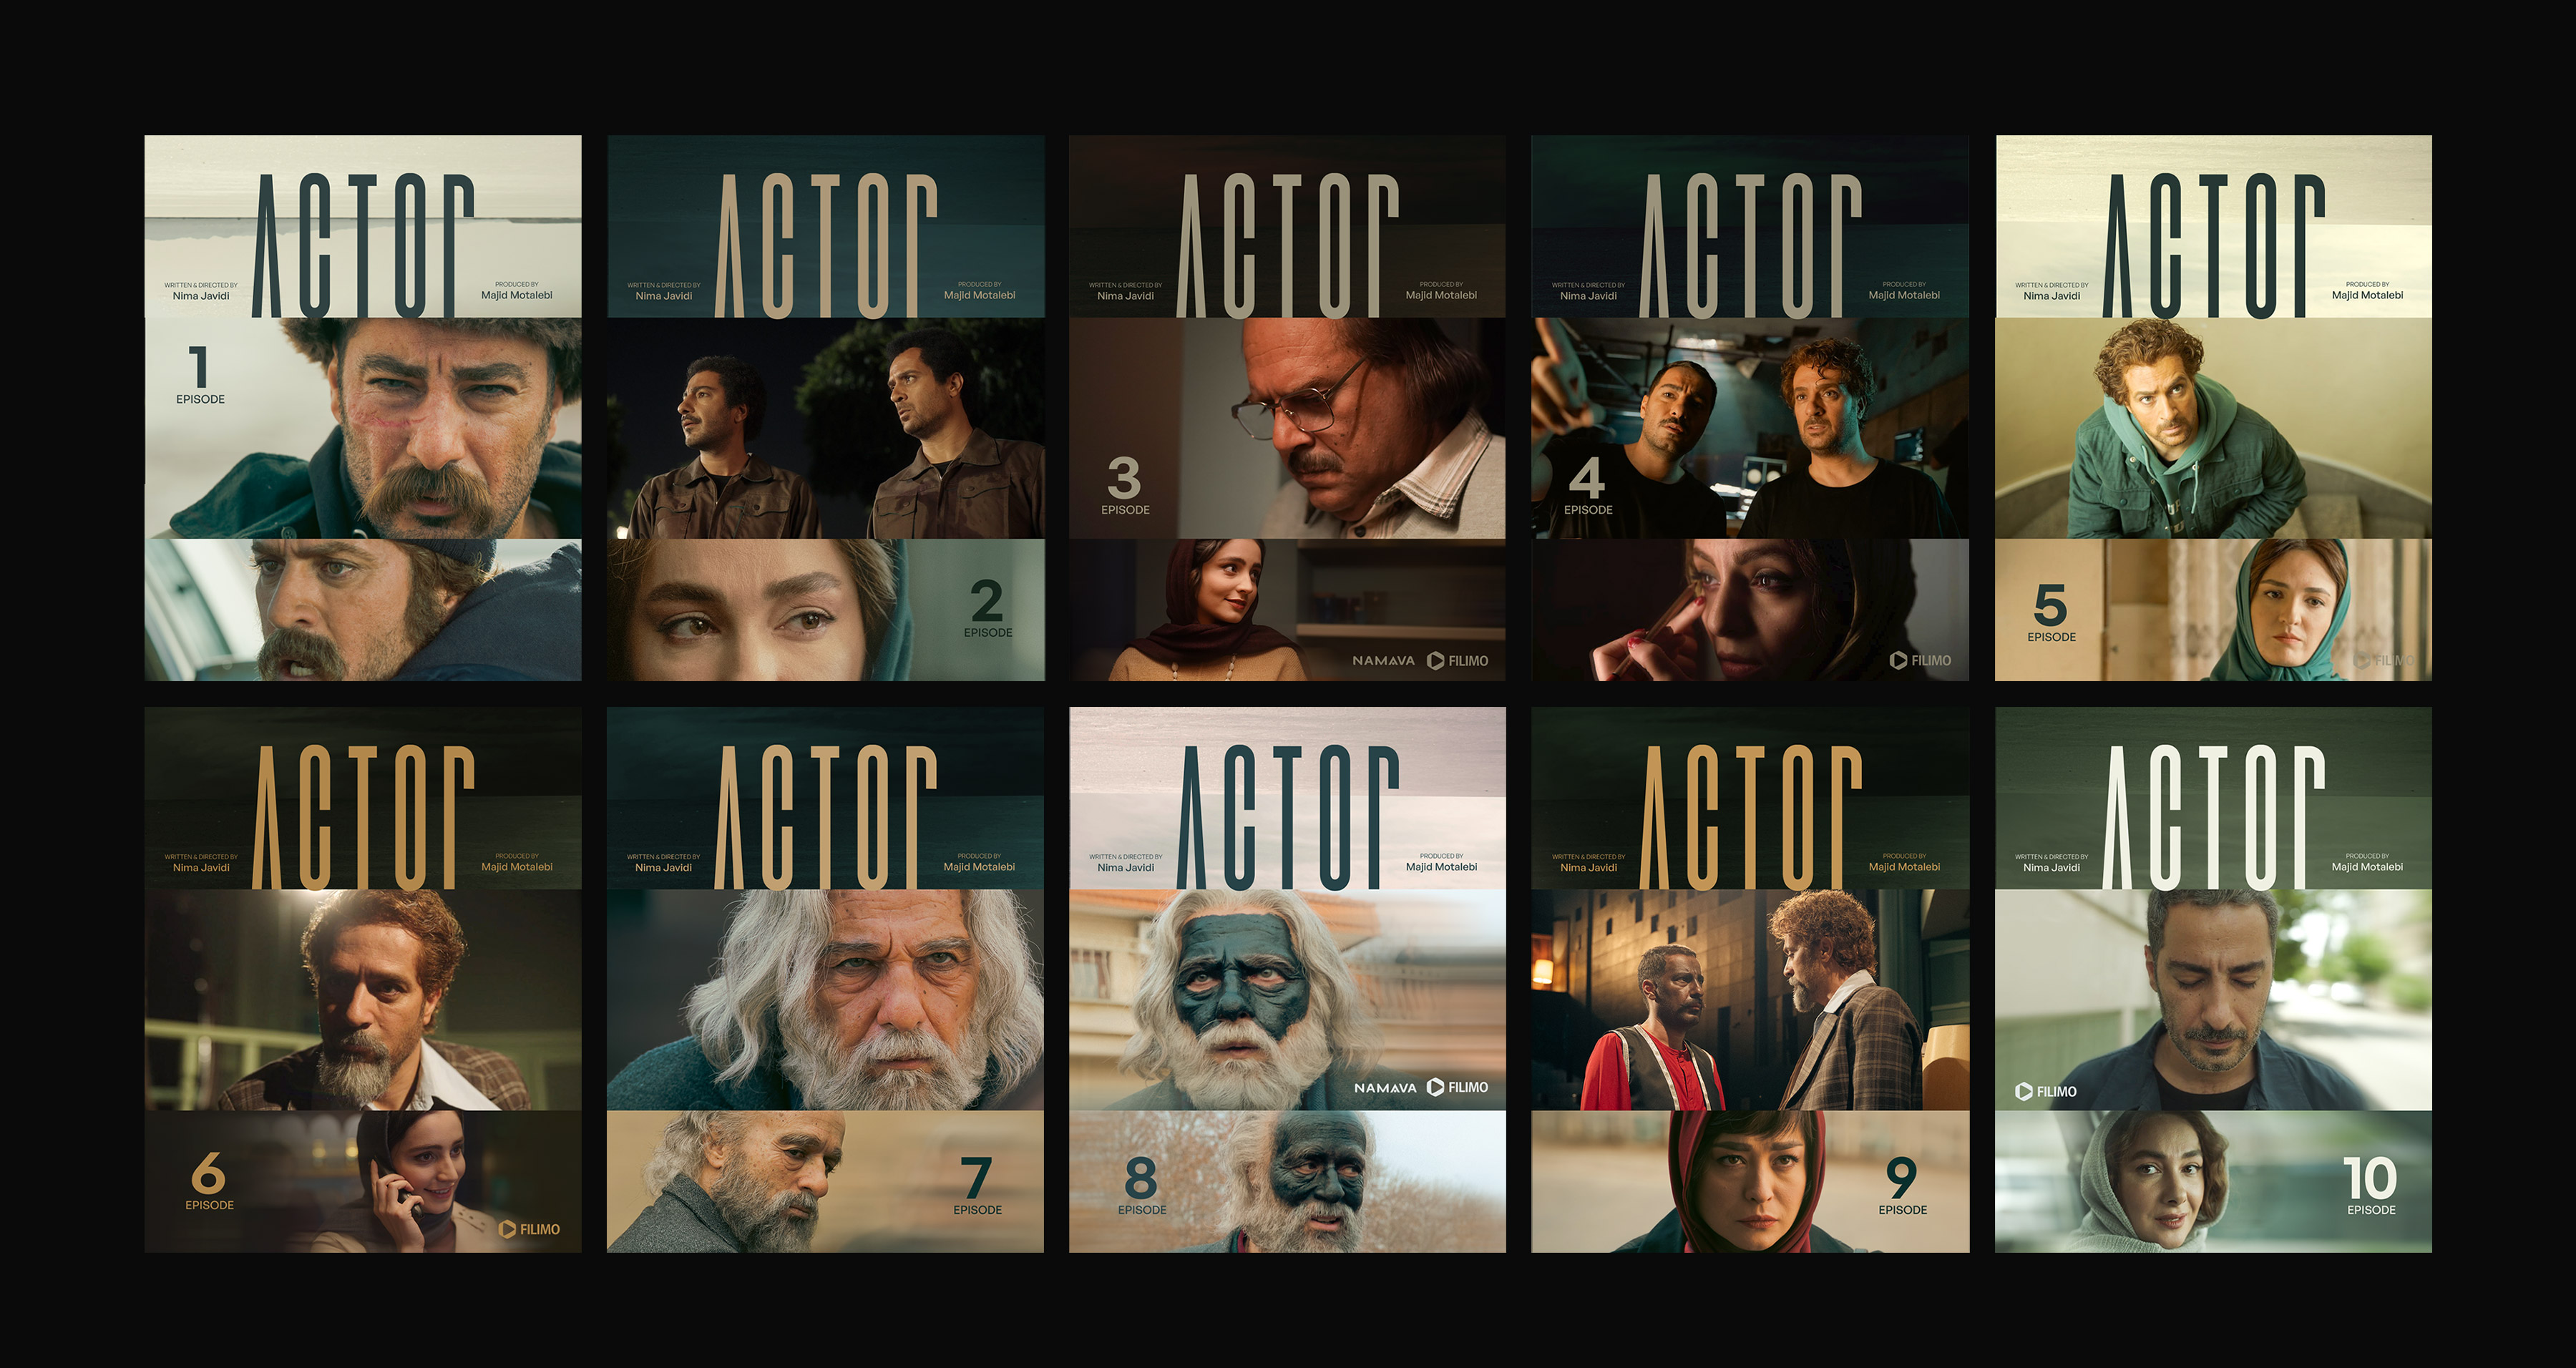 The Actor Series